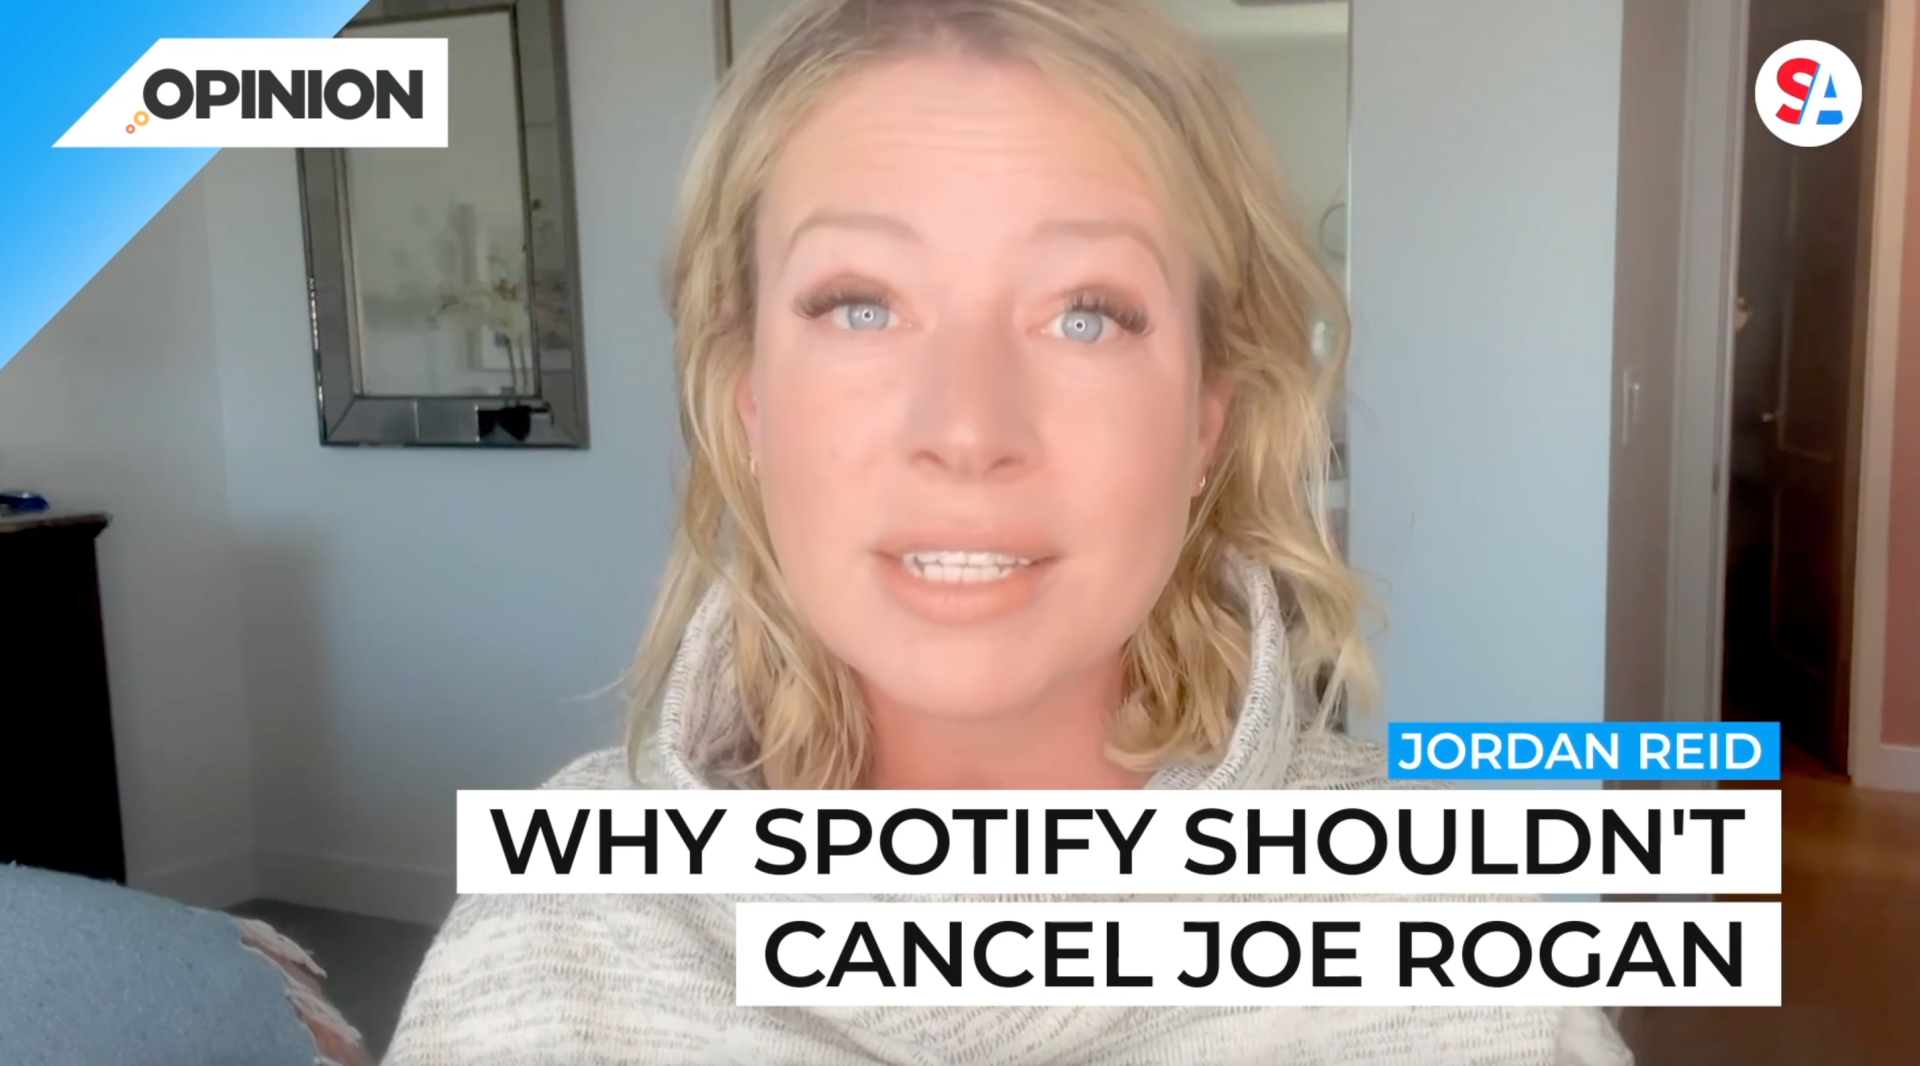 If Spotify pulls the plug on Joe Rogan and his misinformation, he won't go away, so let's consider another option before cancelling him.